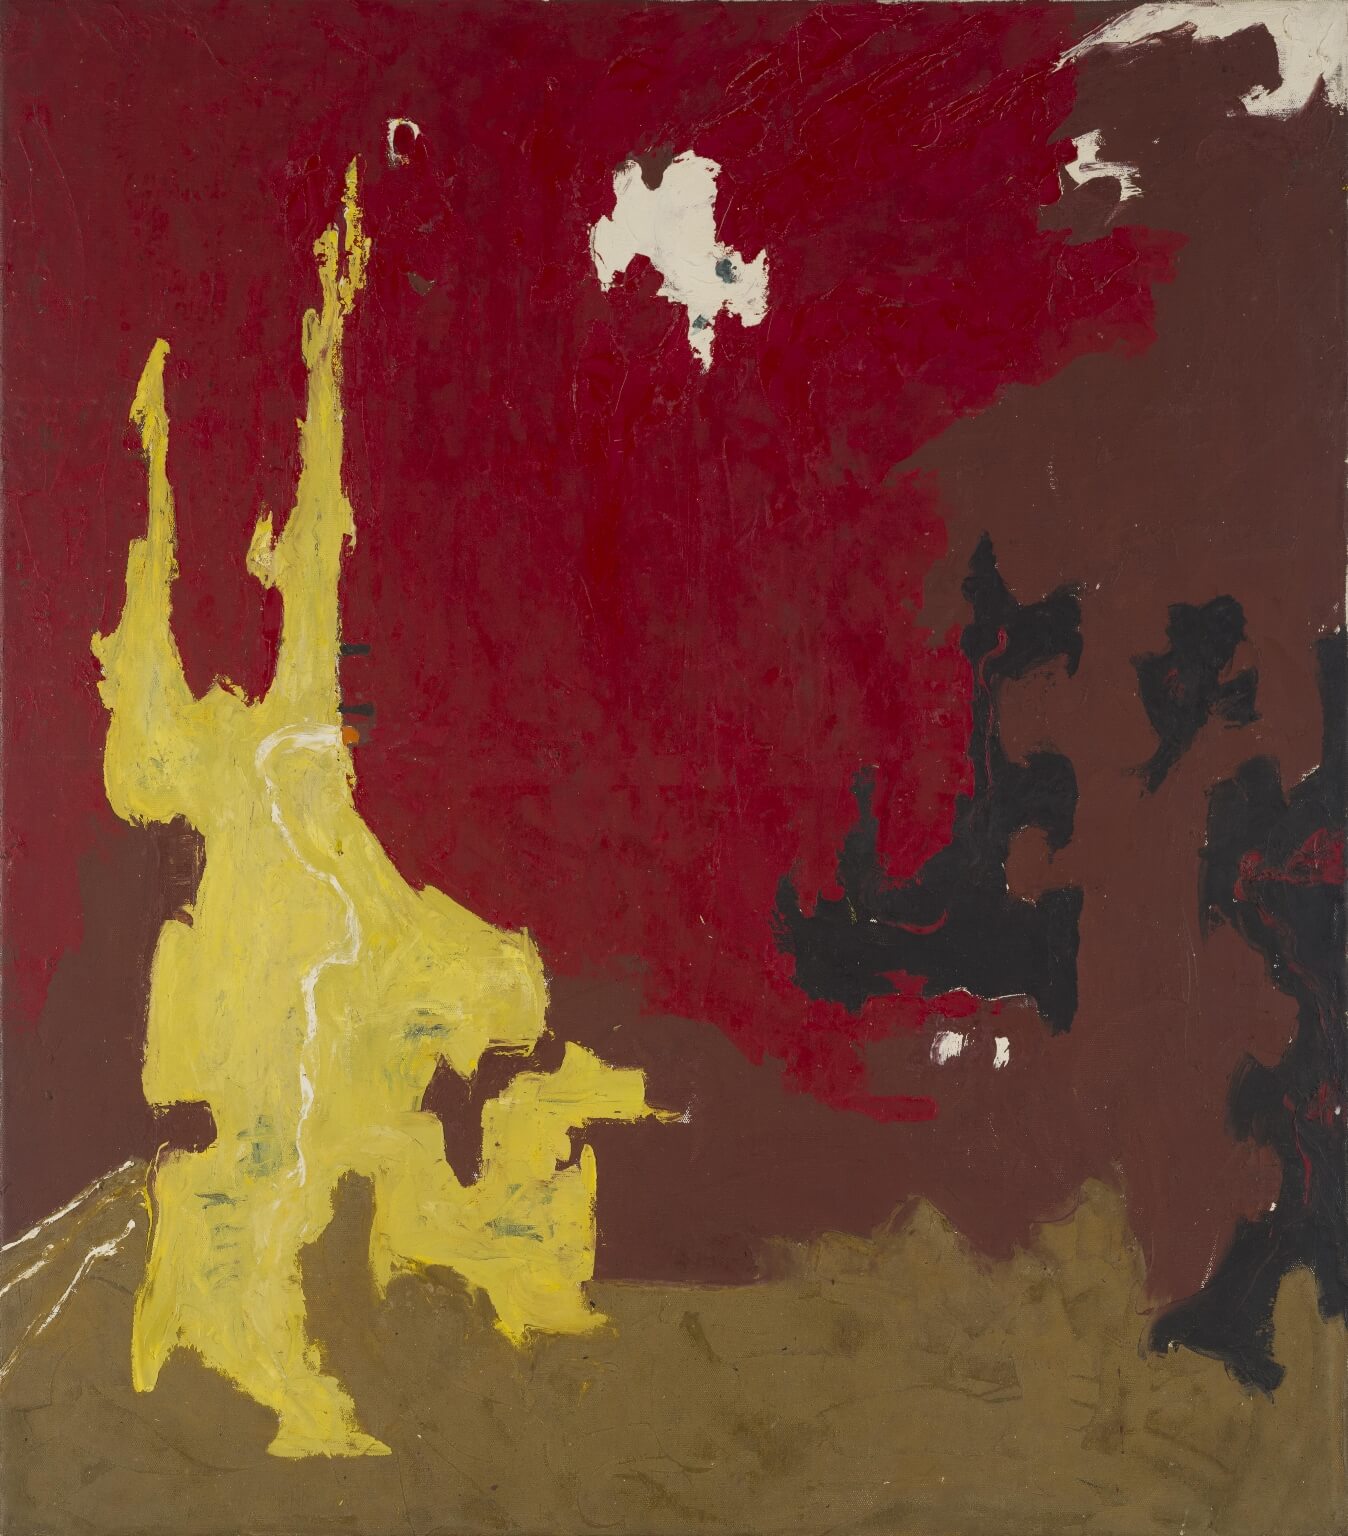 Abstract oil painting with a large background section in red, a yellow figure in the foreground, tan along the bottom, brown and black along the side, and white splotches toward the top